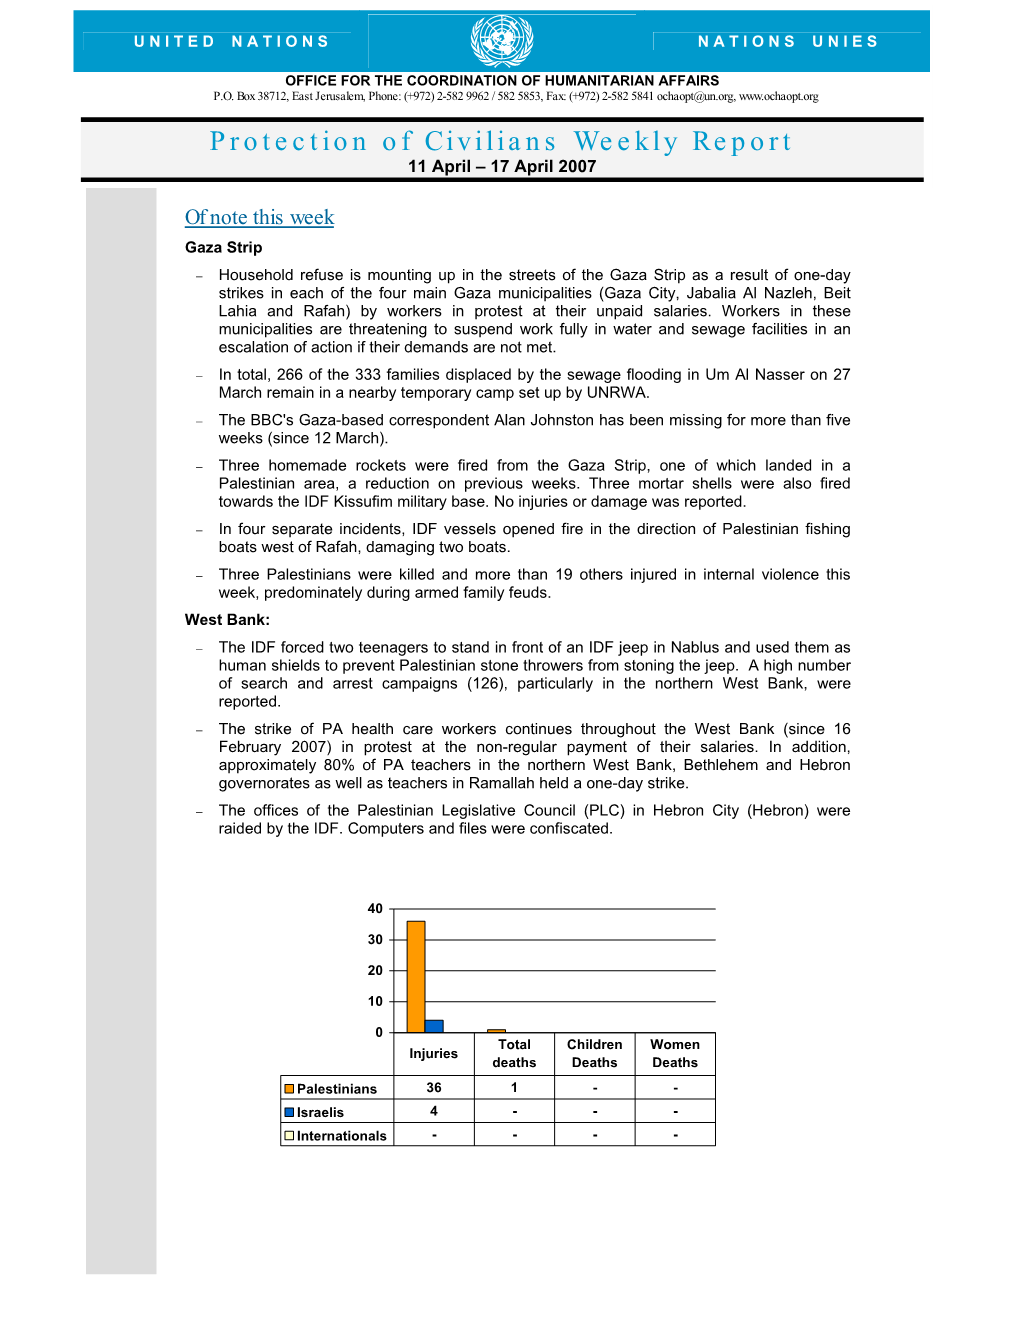 Protection of Civilians Weekly Report 11 April – 17 April 2007